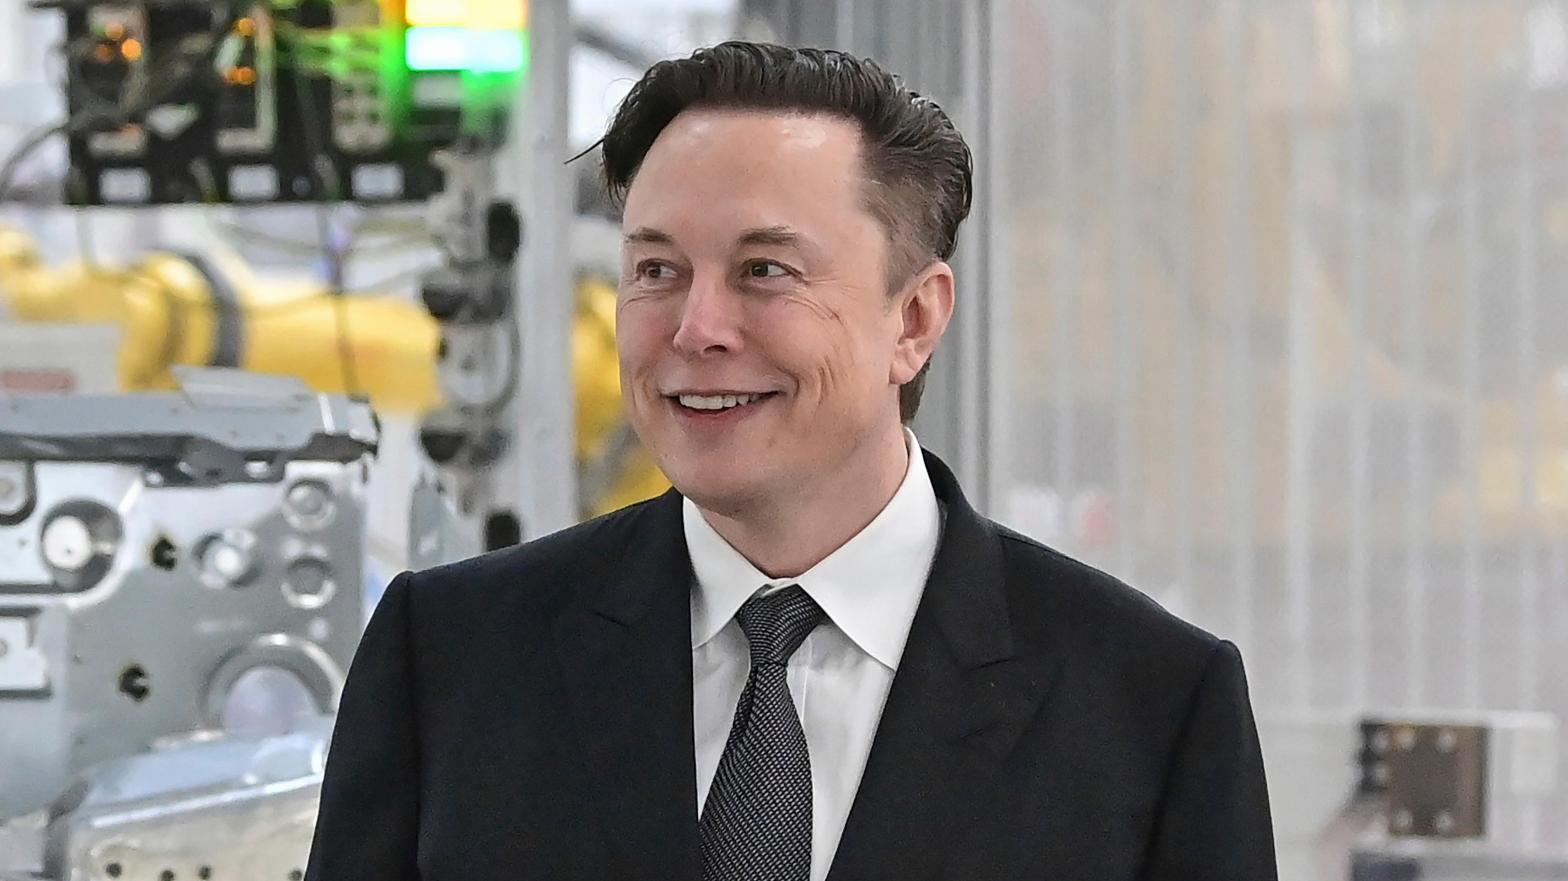 Tesla CEO Elon Musk, America's wealthiest 51-year-old shitposter, seen in a file photo in Germany on March 22, 2022. (Photo: Patrick Pleul, AP)